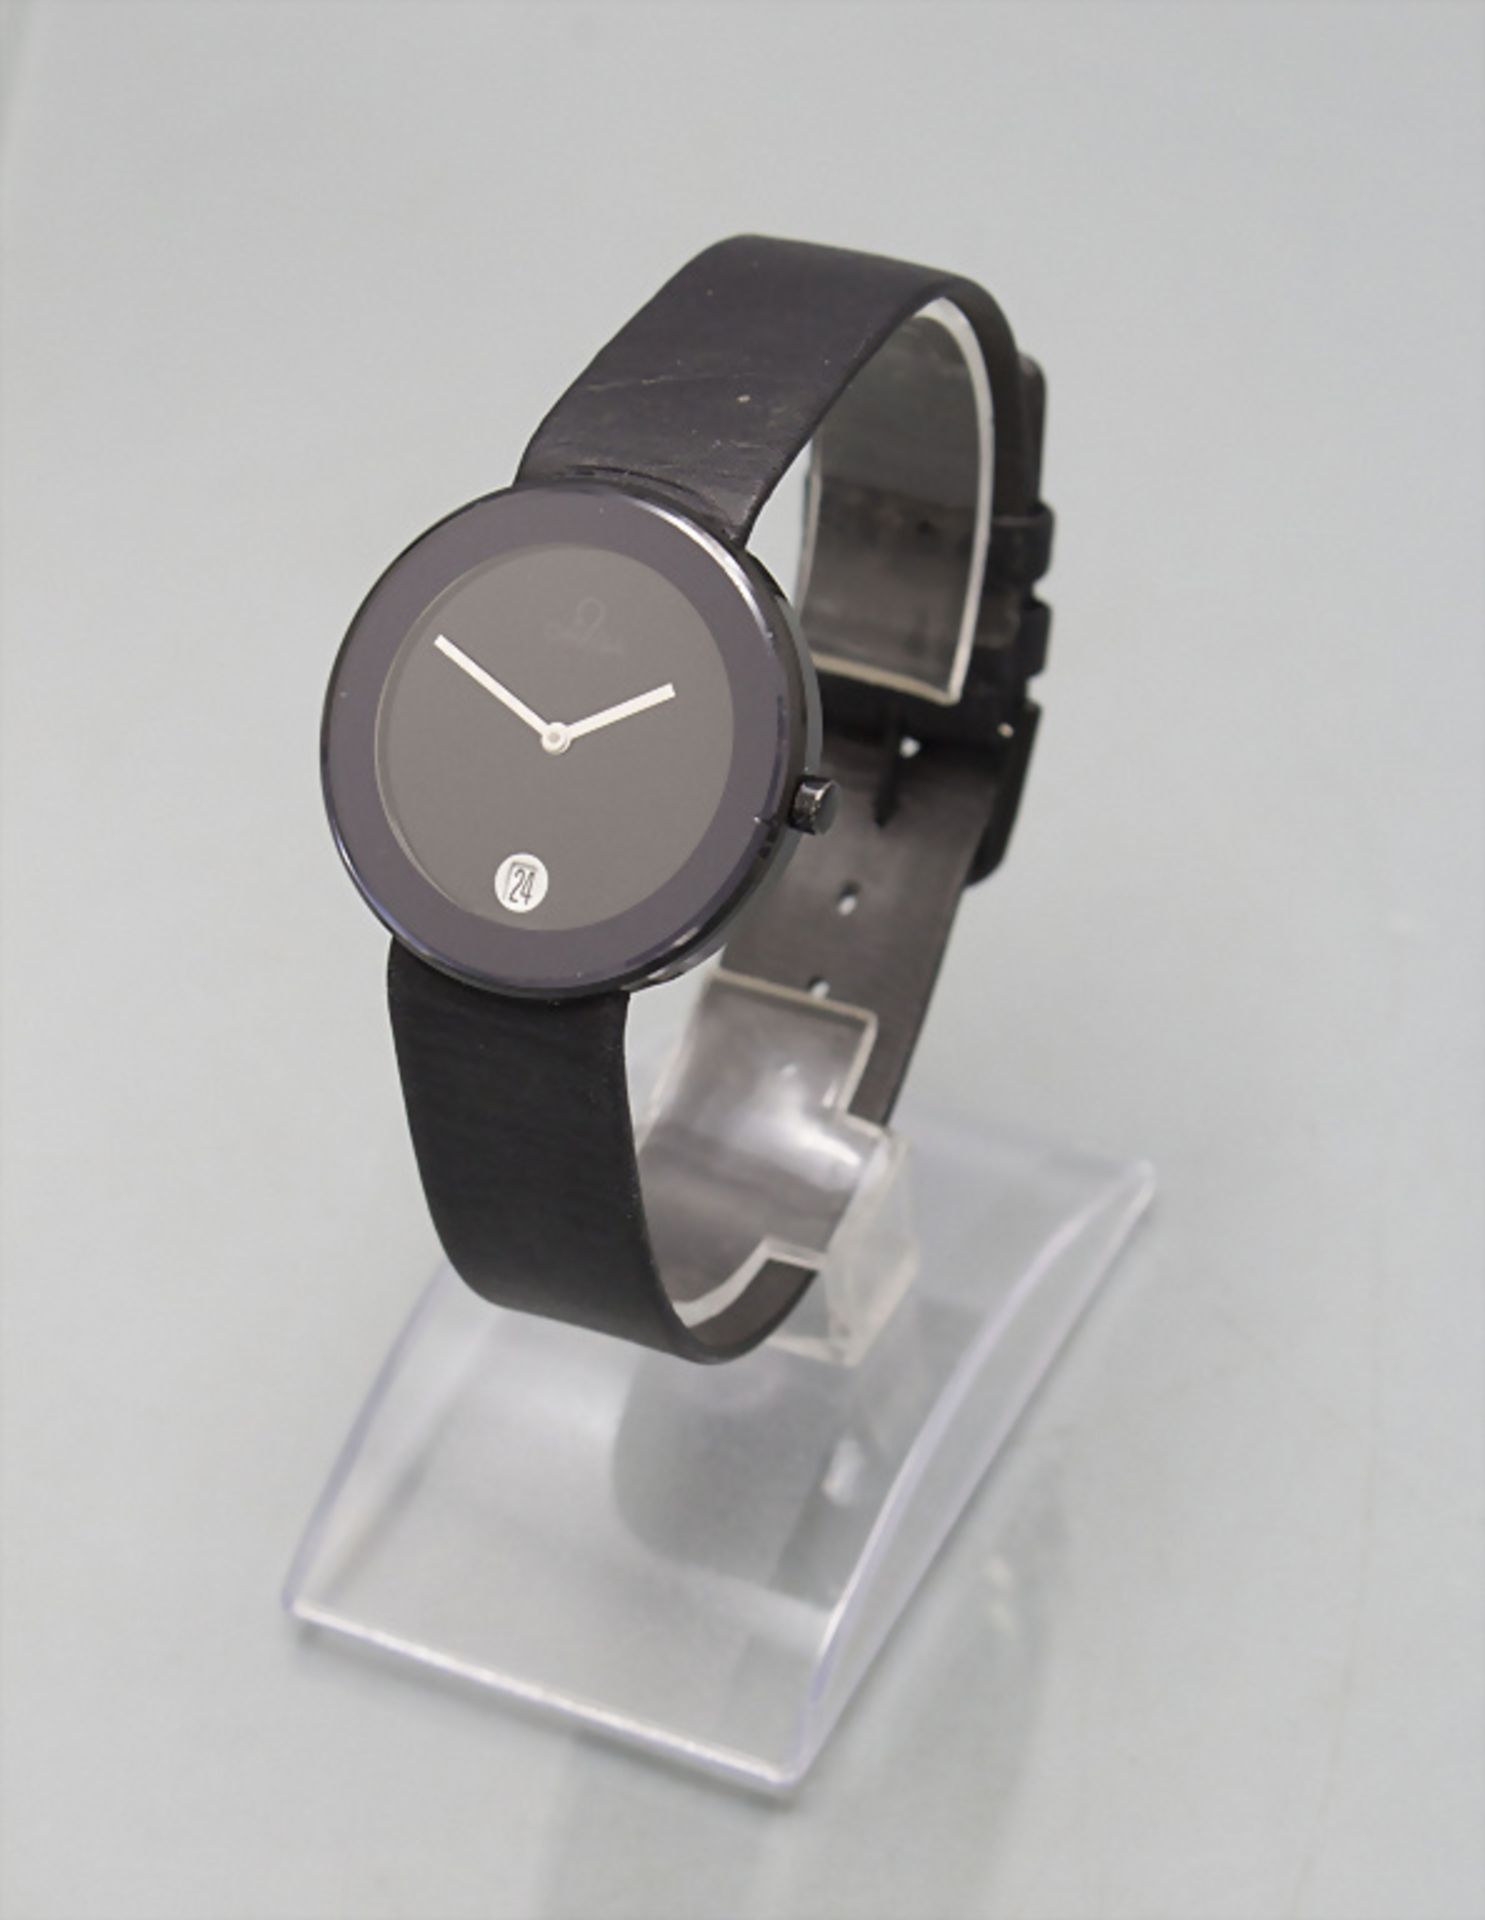 Unisexuhr / A unisex wristwatch, Omega 'Art Collection', 1987 - Image 2 of 3